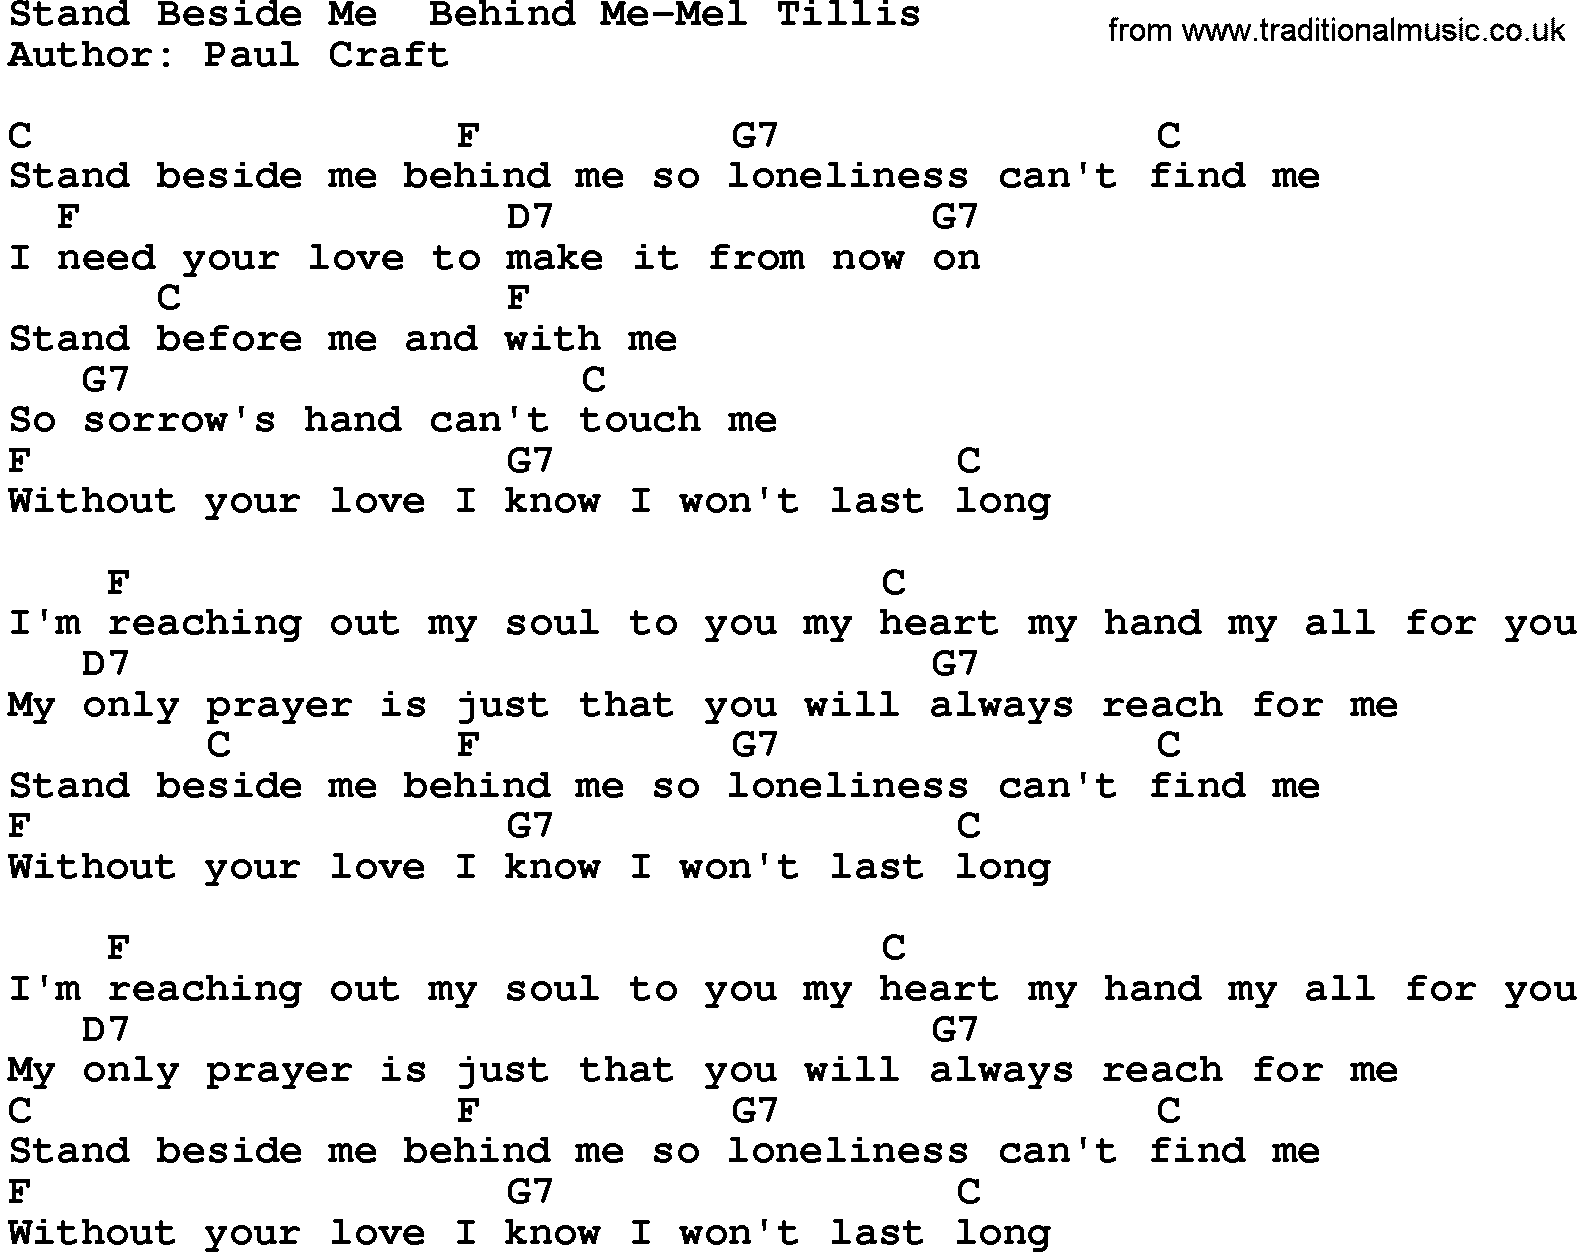 Country music song: Stand Beside Me Behind Me-Mel Tillis lyrics and chords